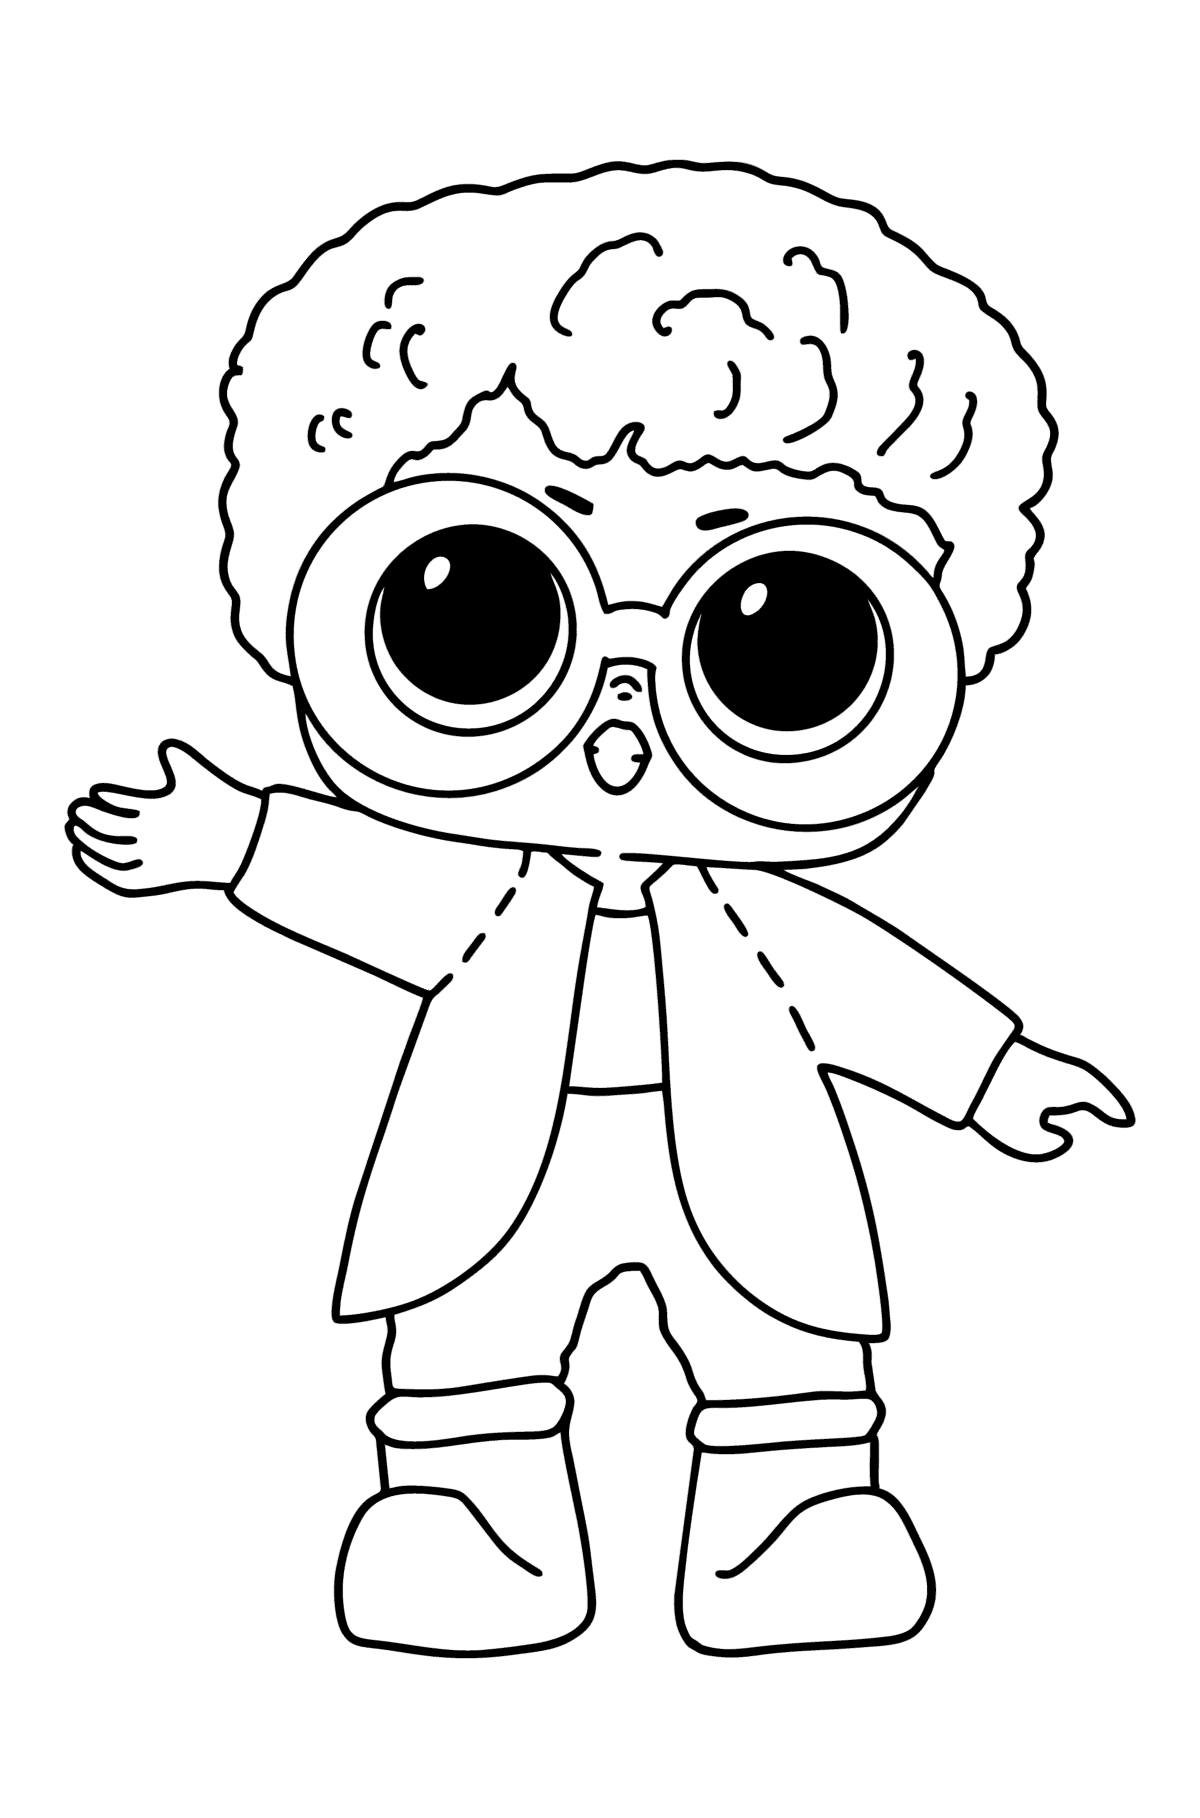 LOL Surprise Coloring pages   Download, Print, and Color Online